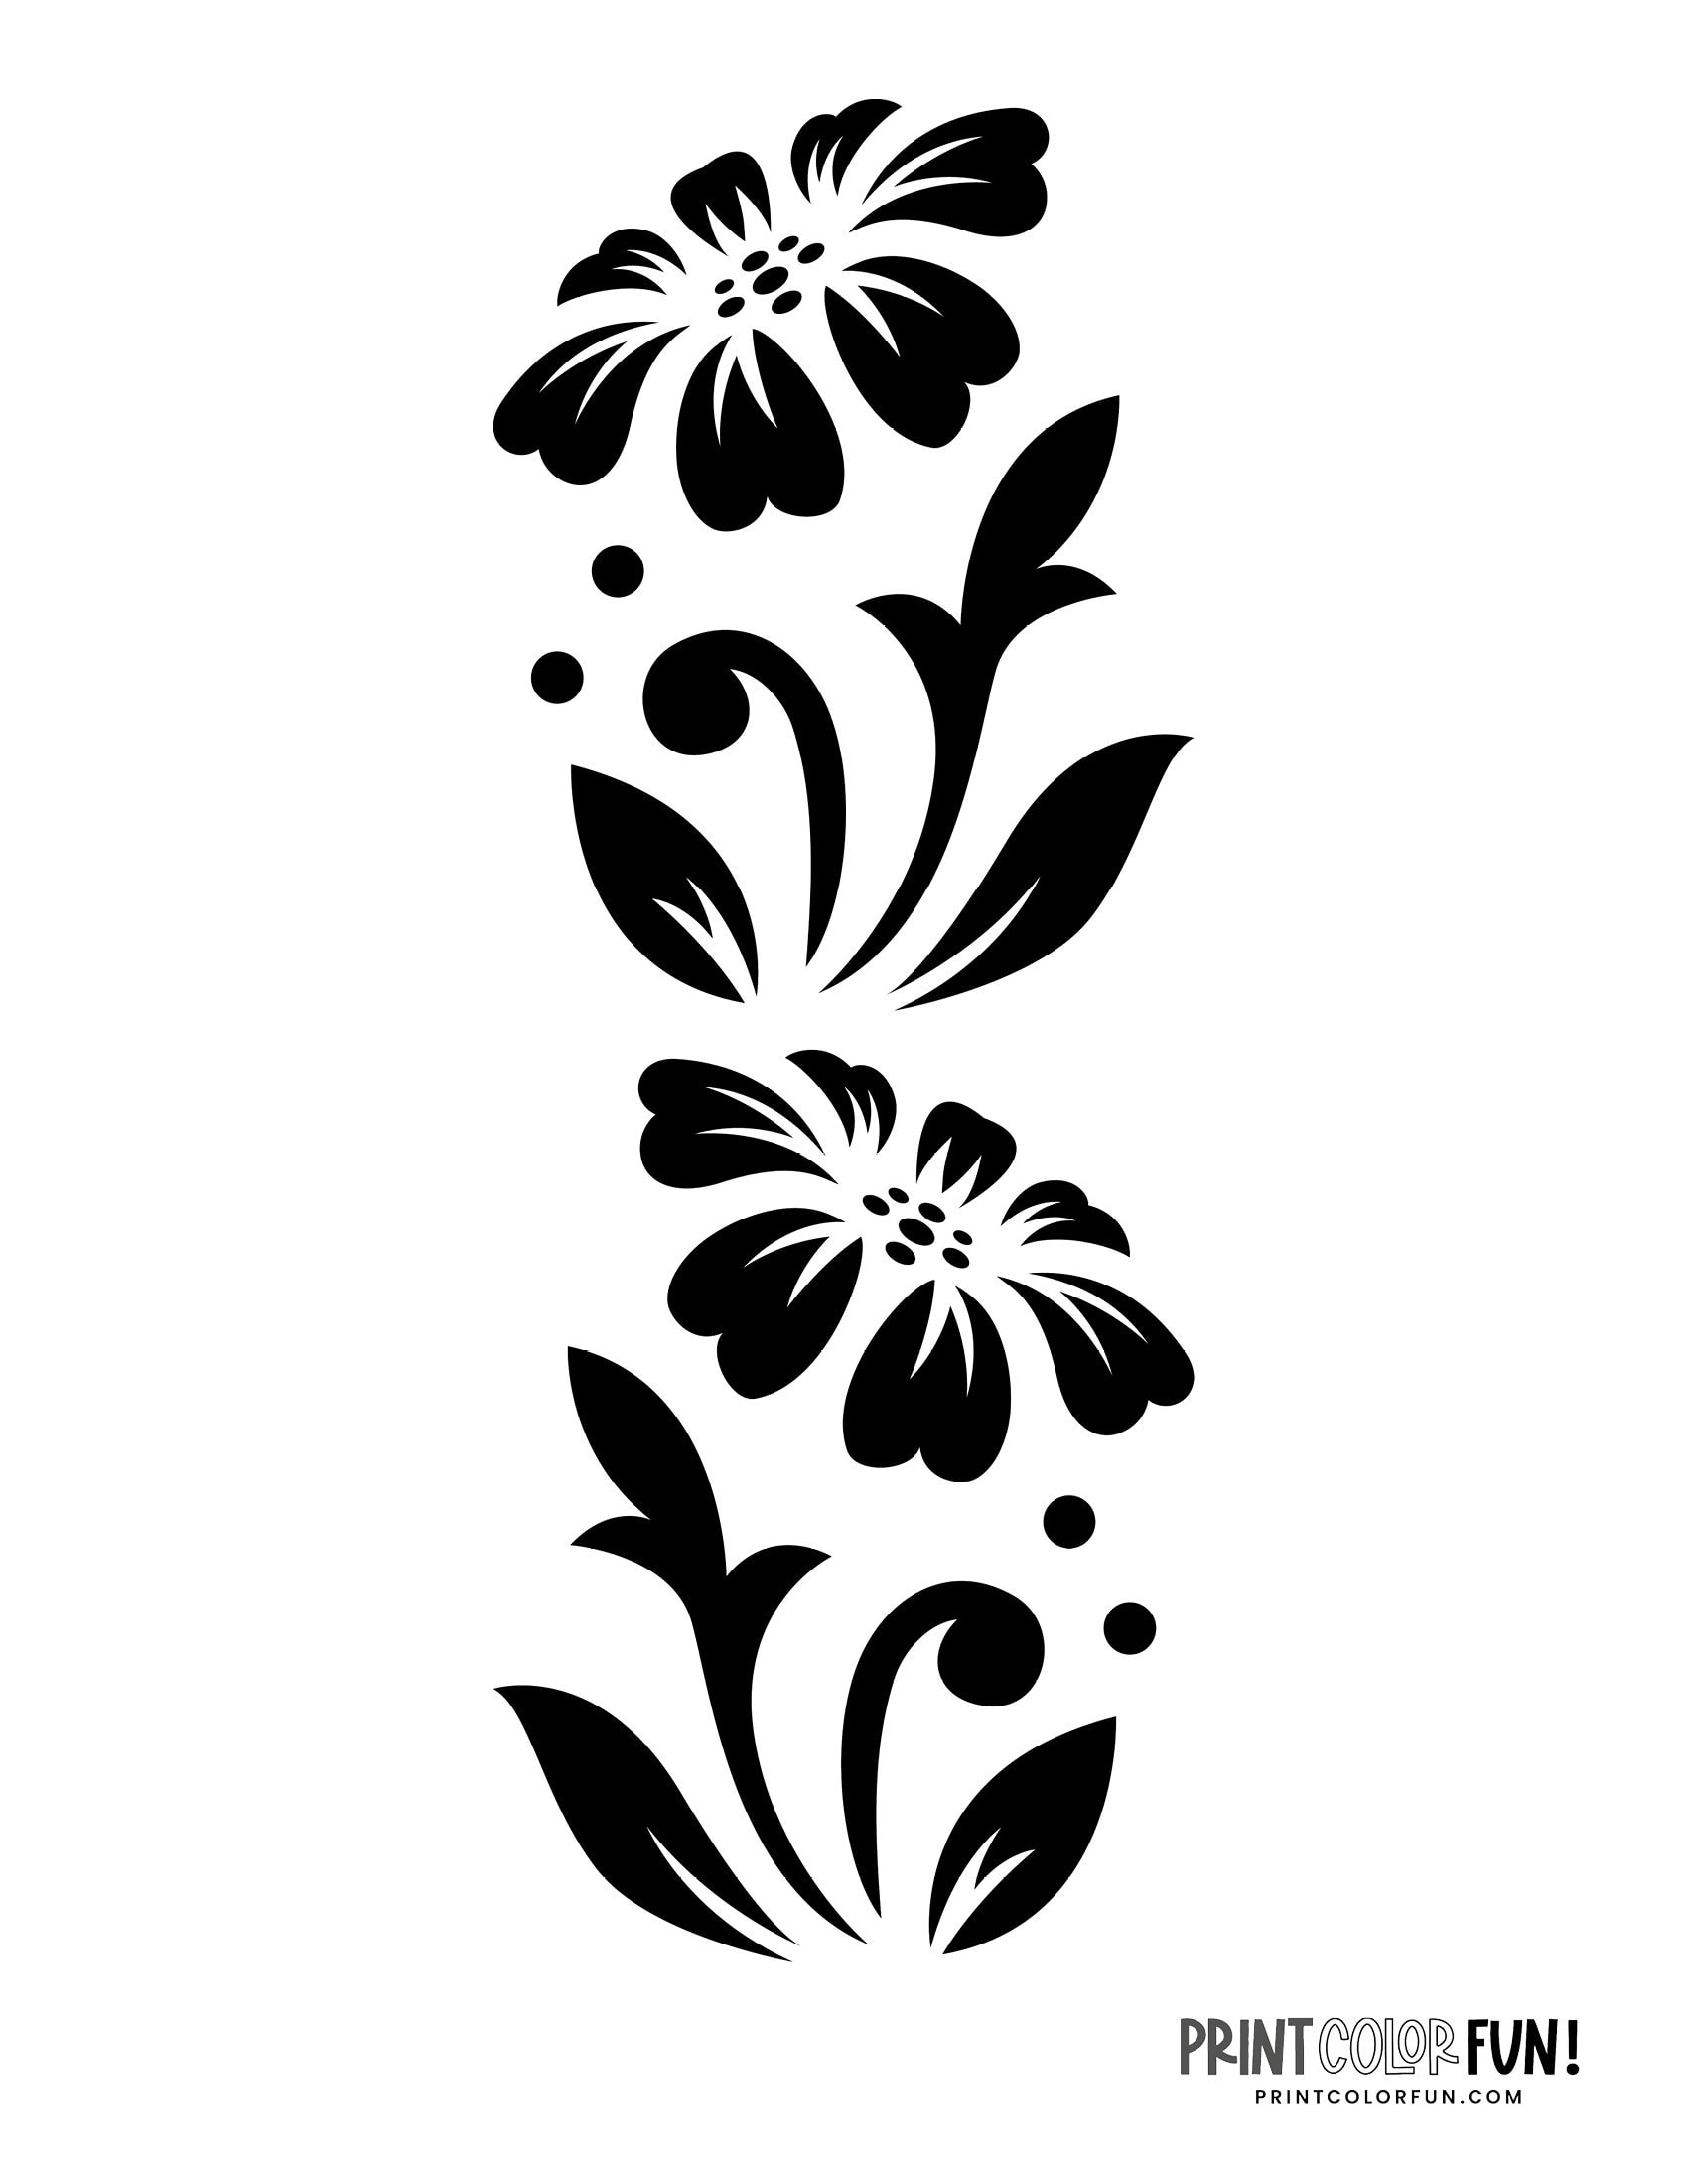 10-free-flower-stencil-designs-for-printing-craft-projects-print